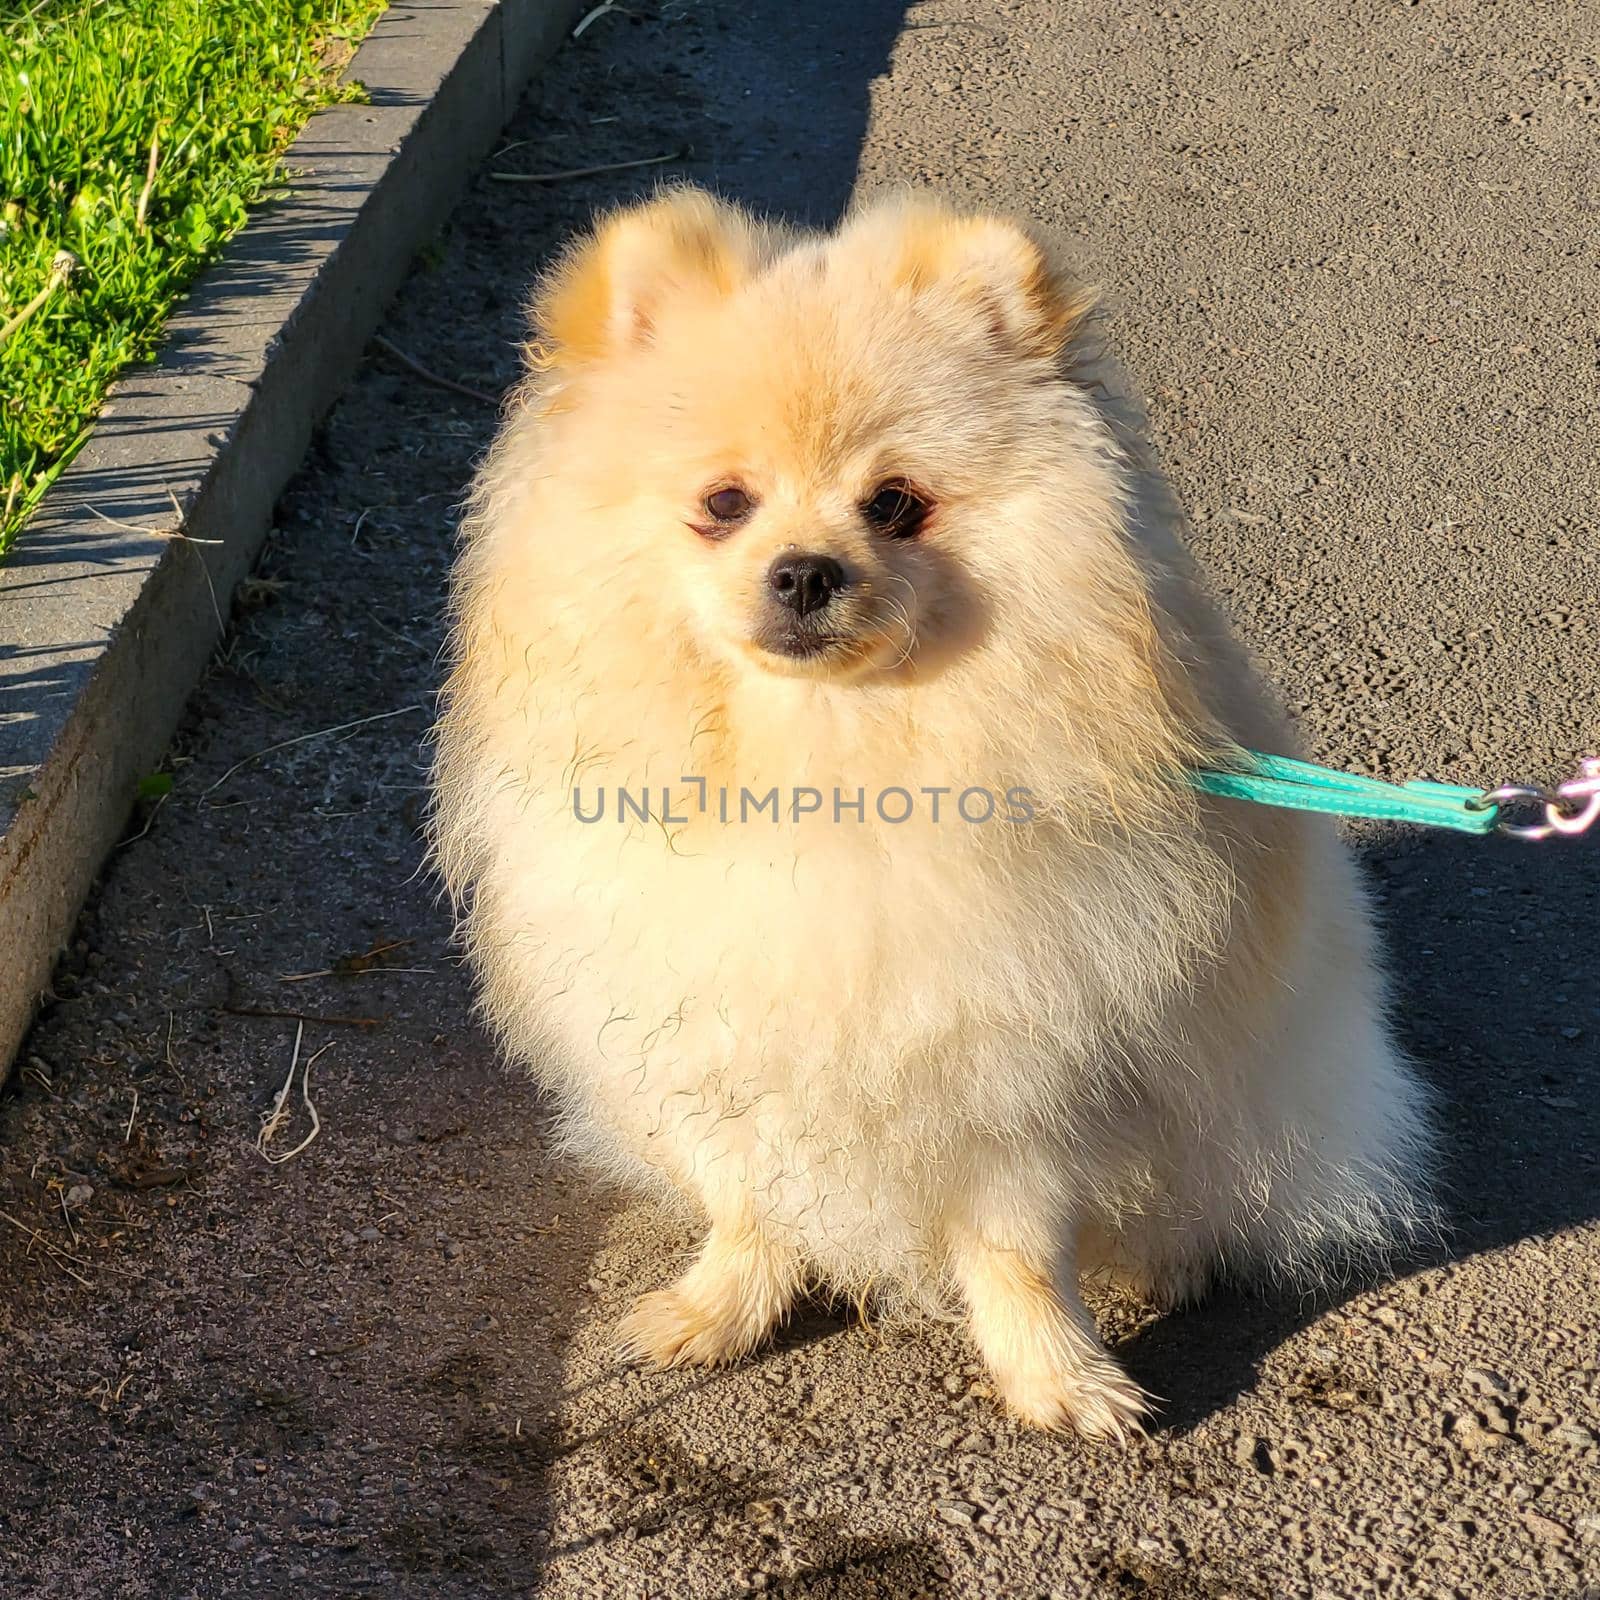 Fluffy little dog looks at the camera in the park on a sunny day by lapushka62